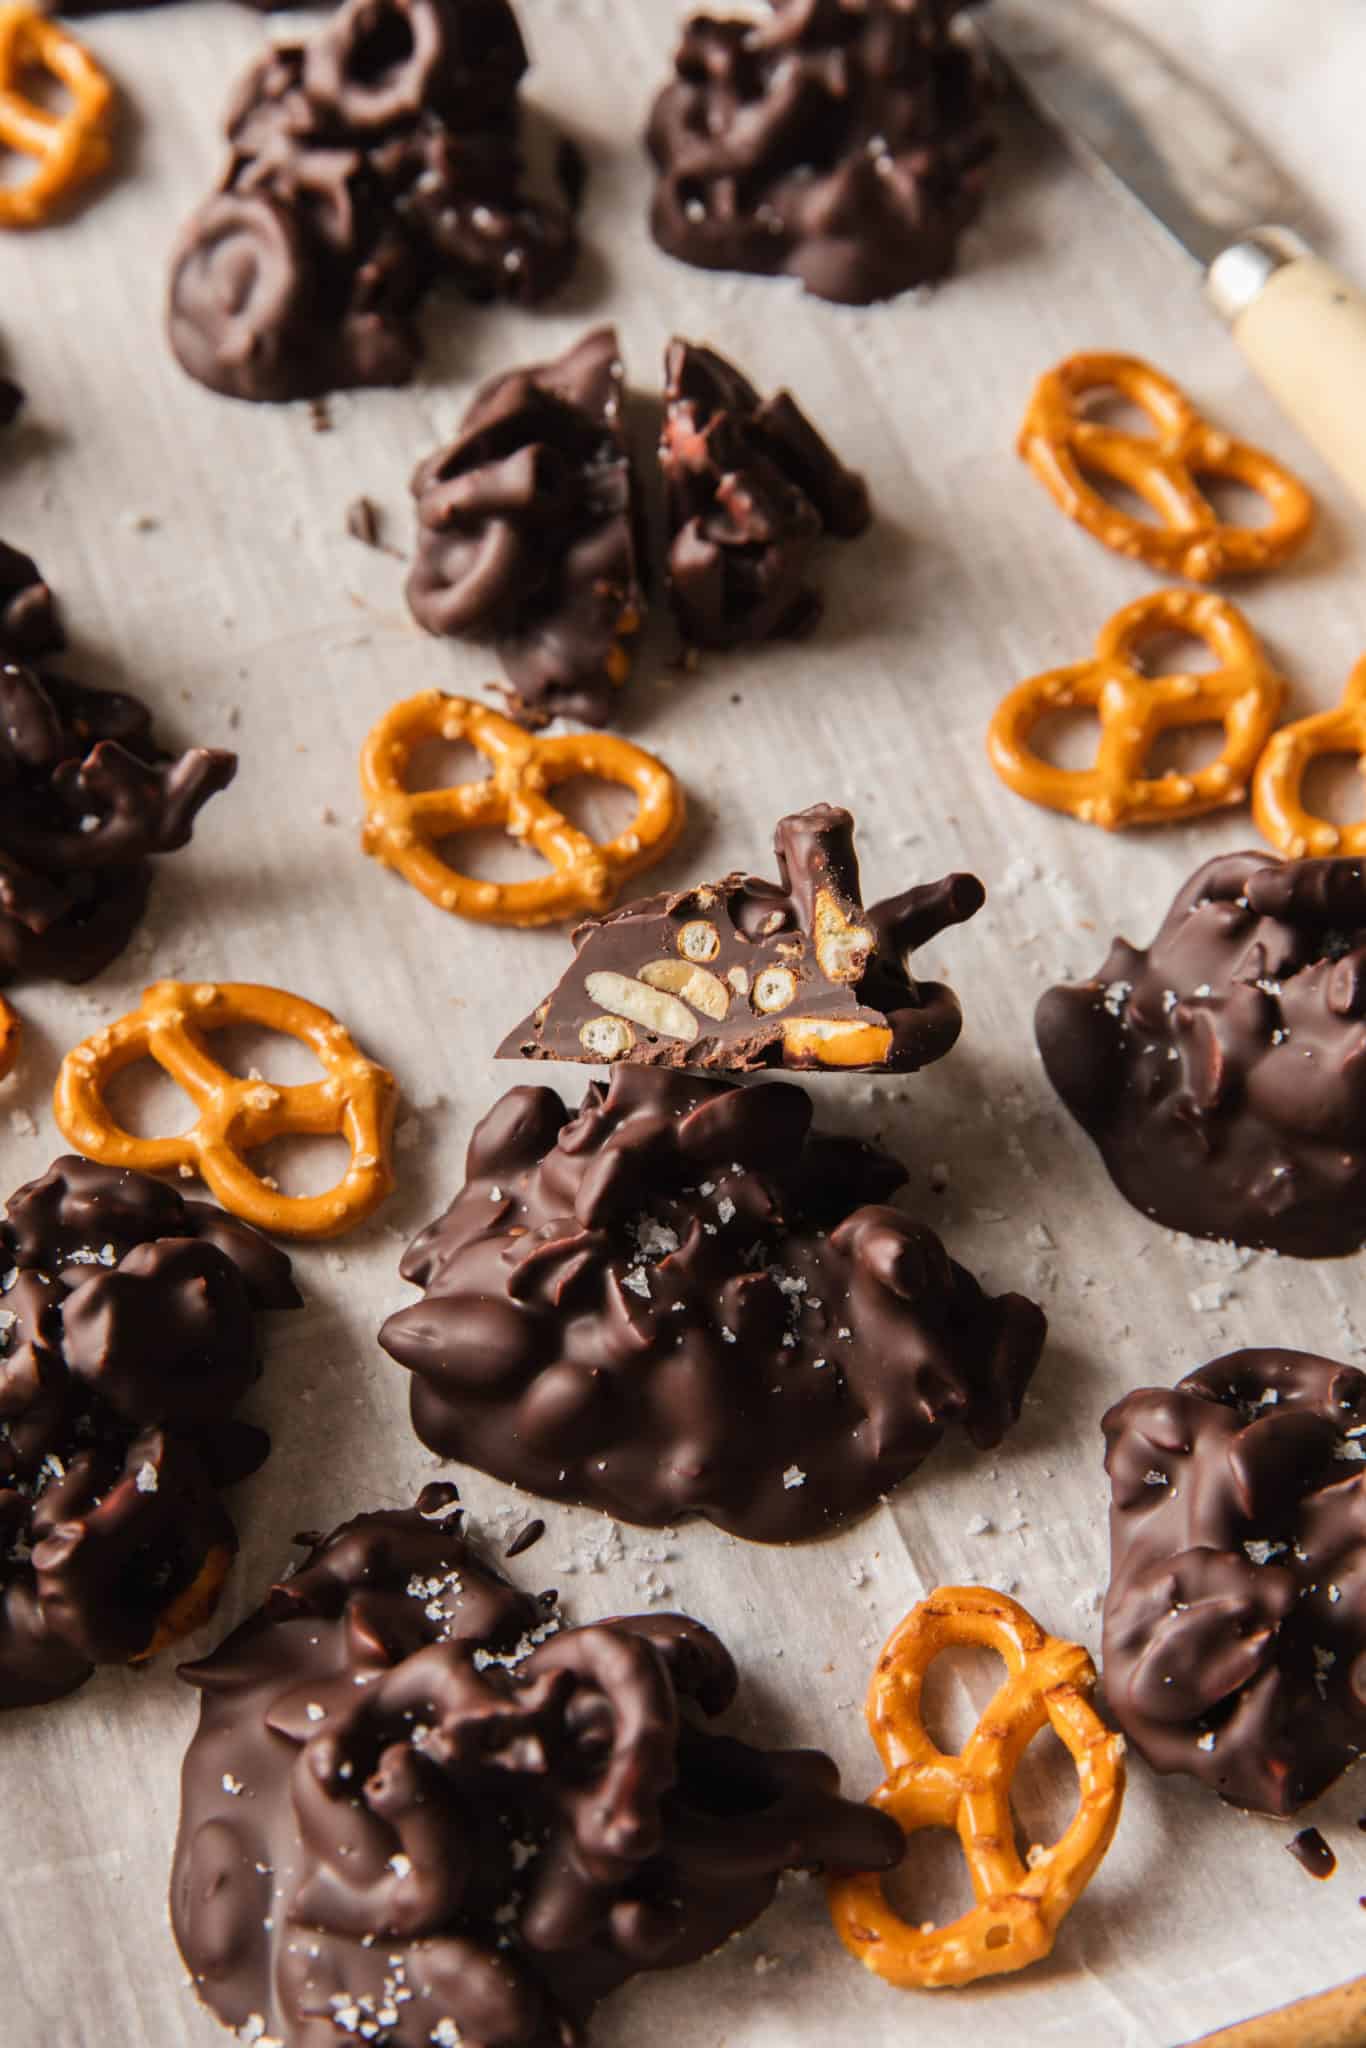 a cluster of chocolate covered pretzels. a perfect healthy snack